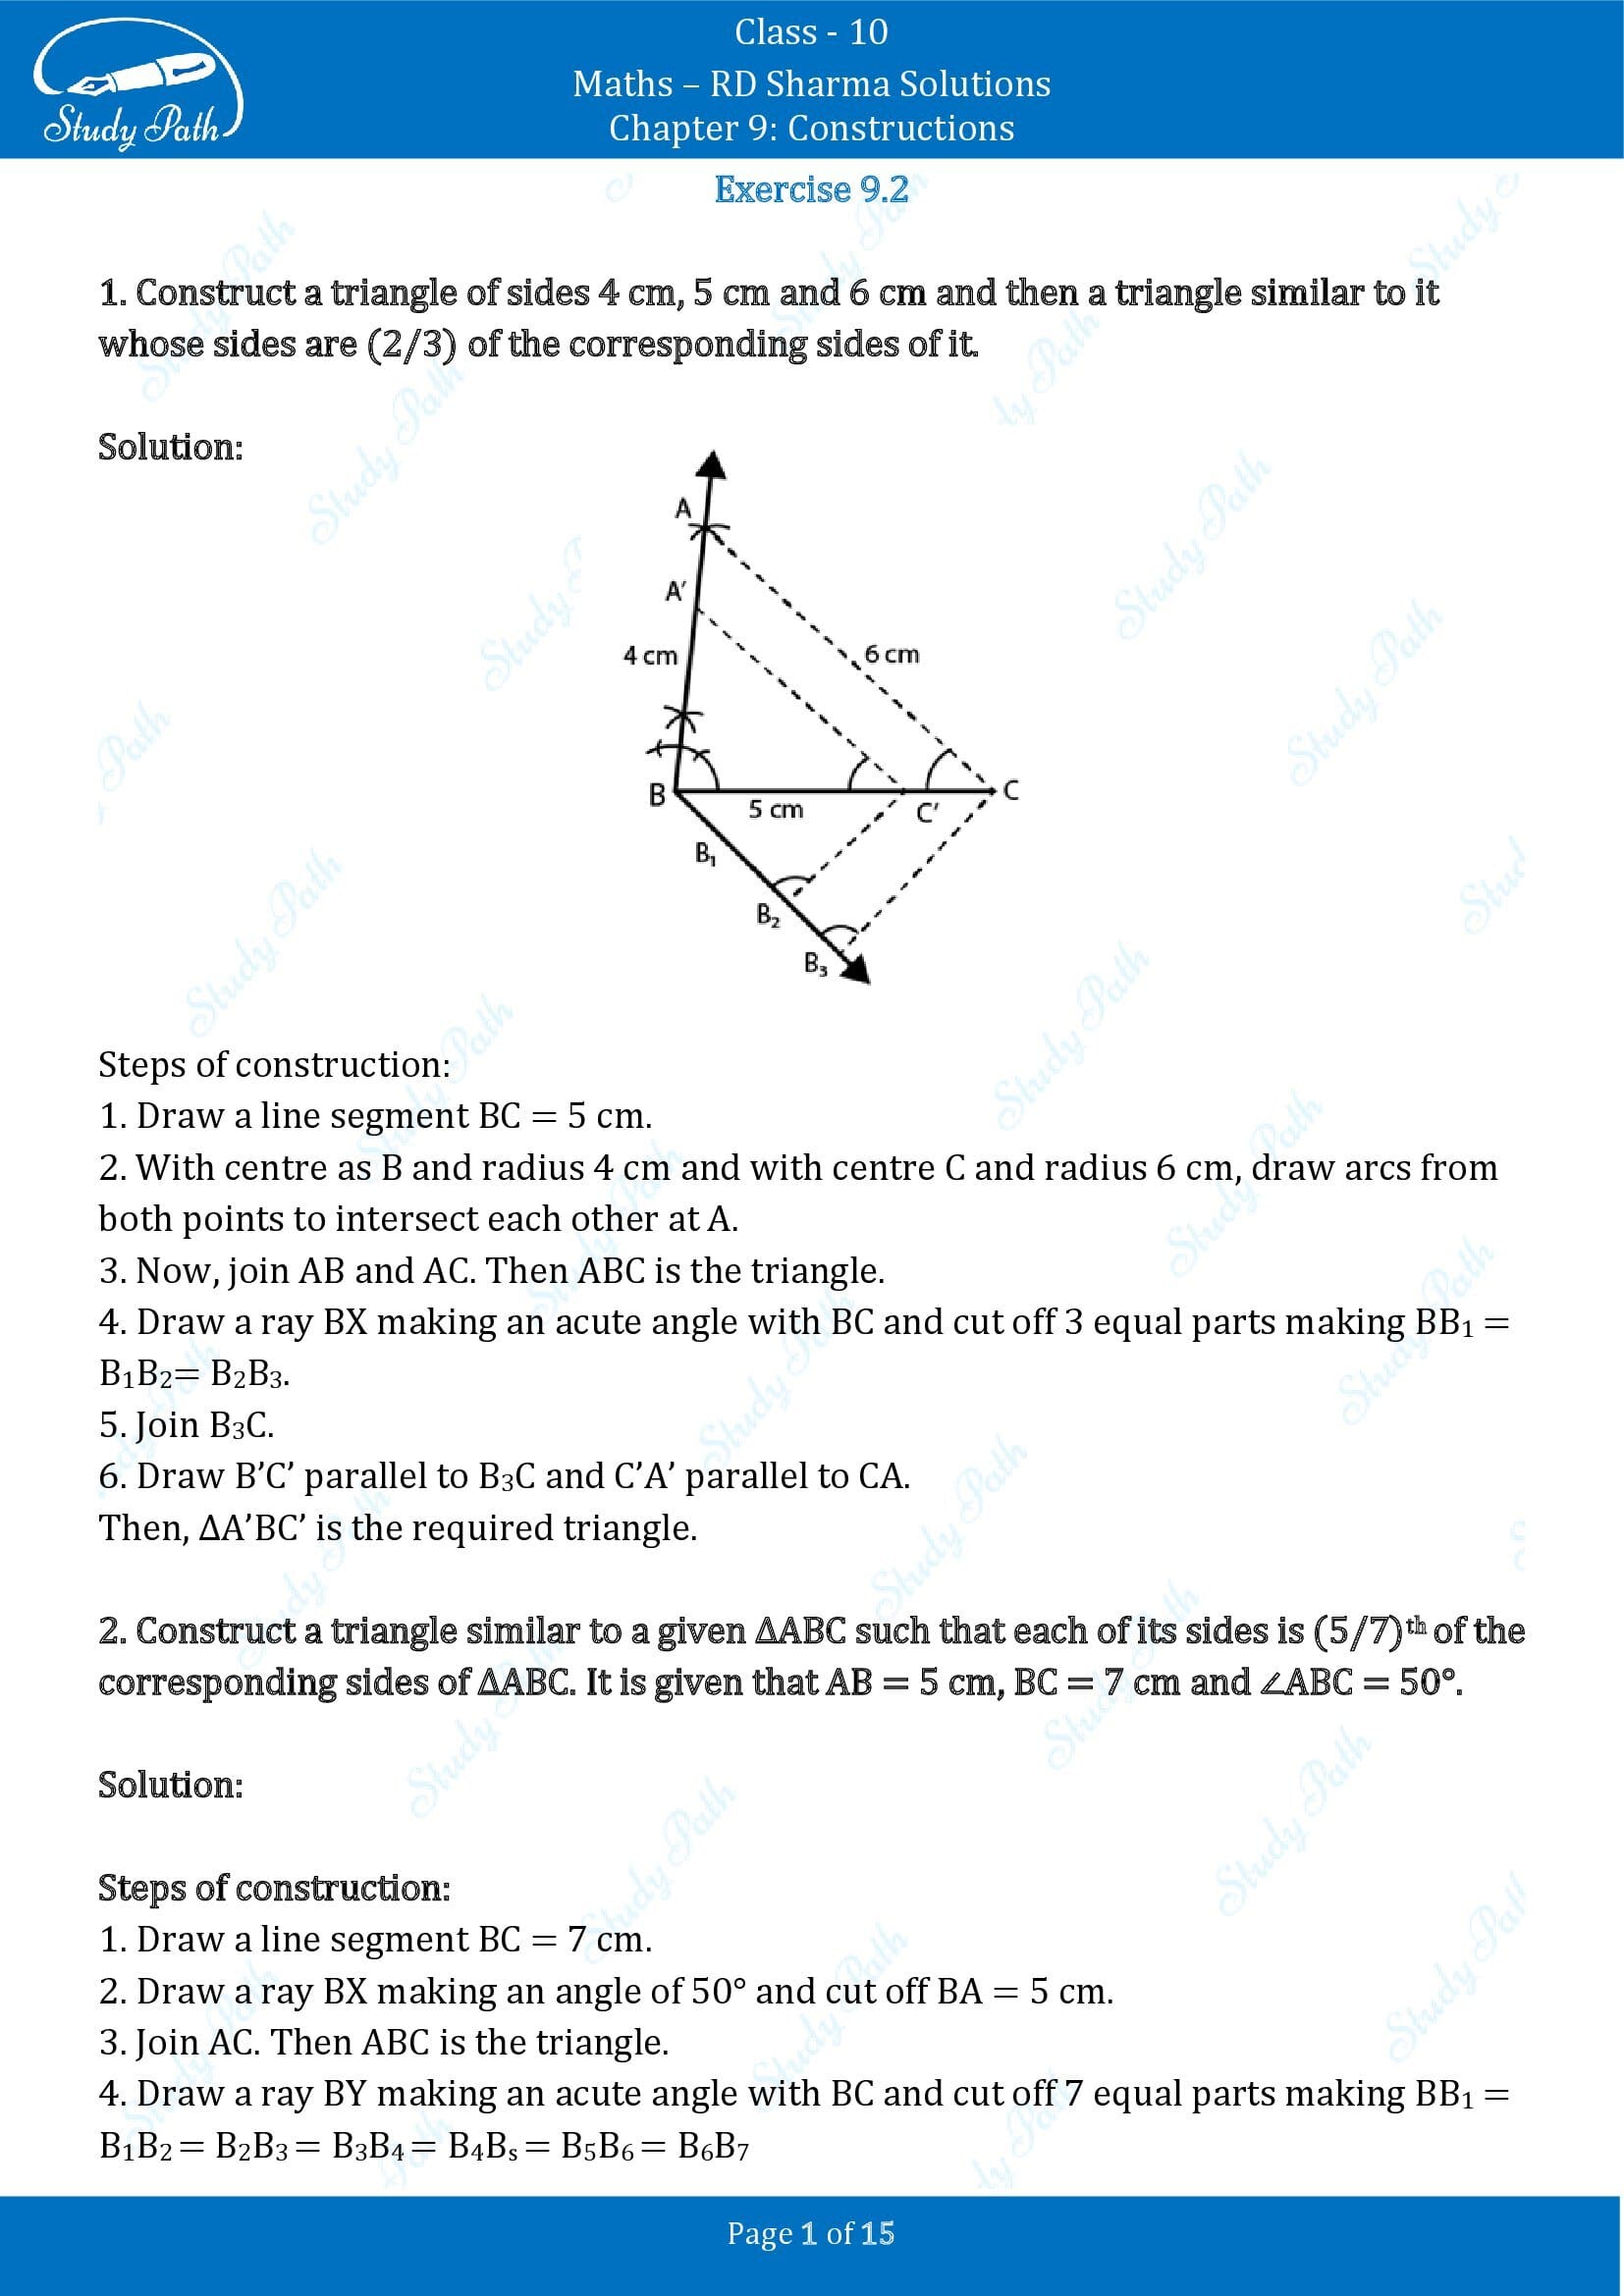 RD Sharma Solutions Class 10 Chapter 9 Constructions Exercise 9.2 00001